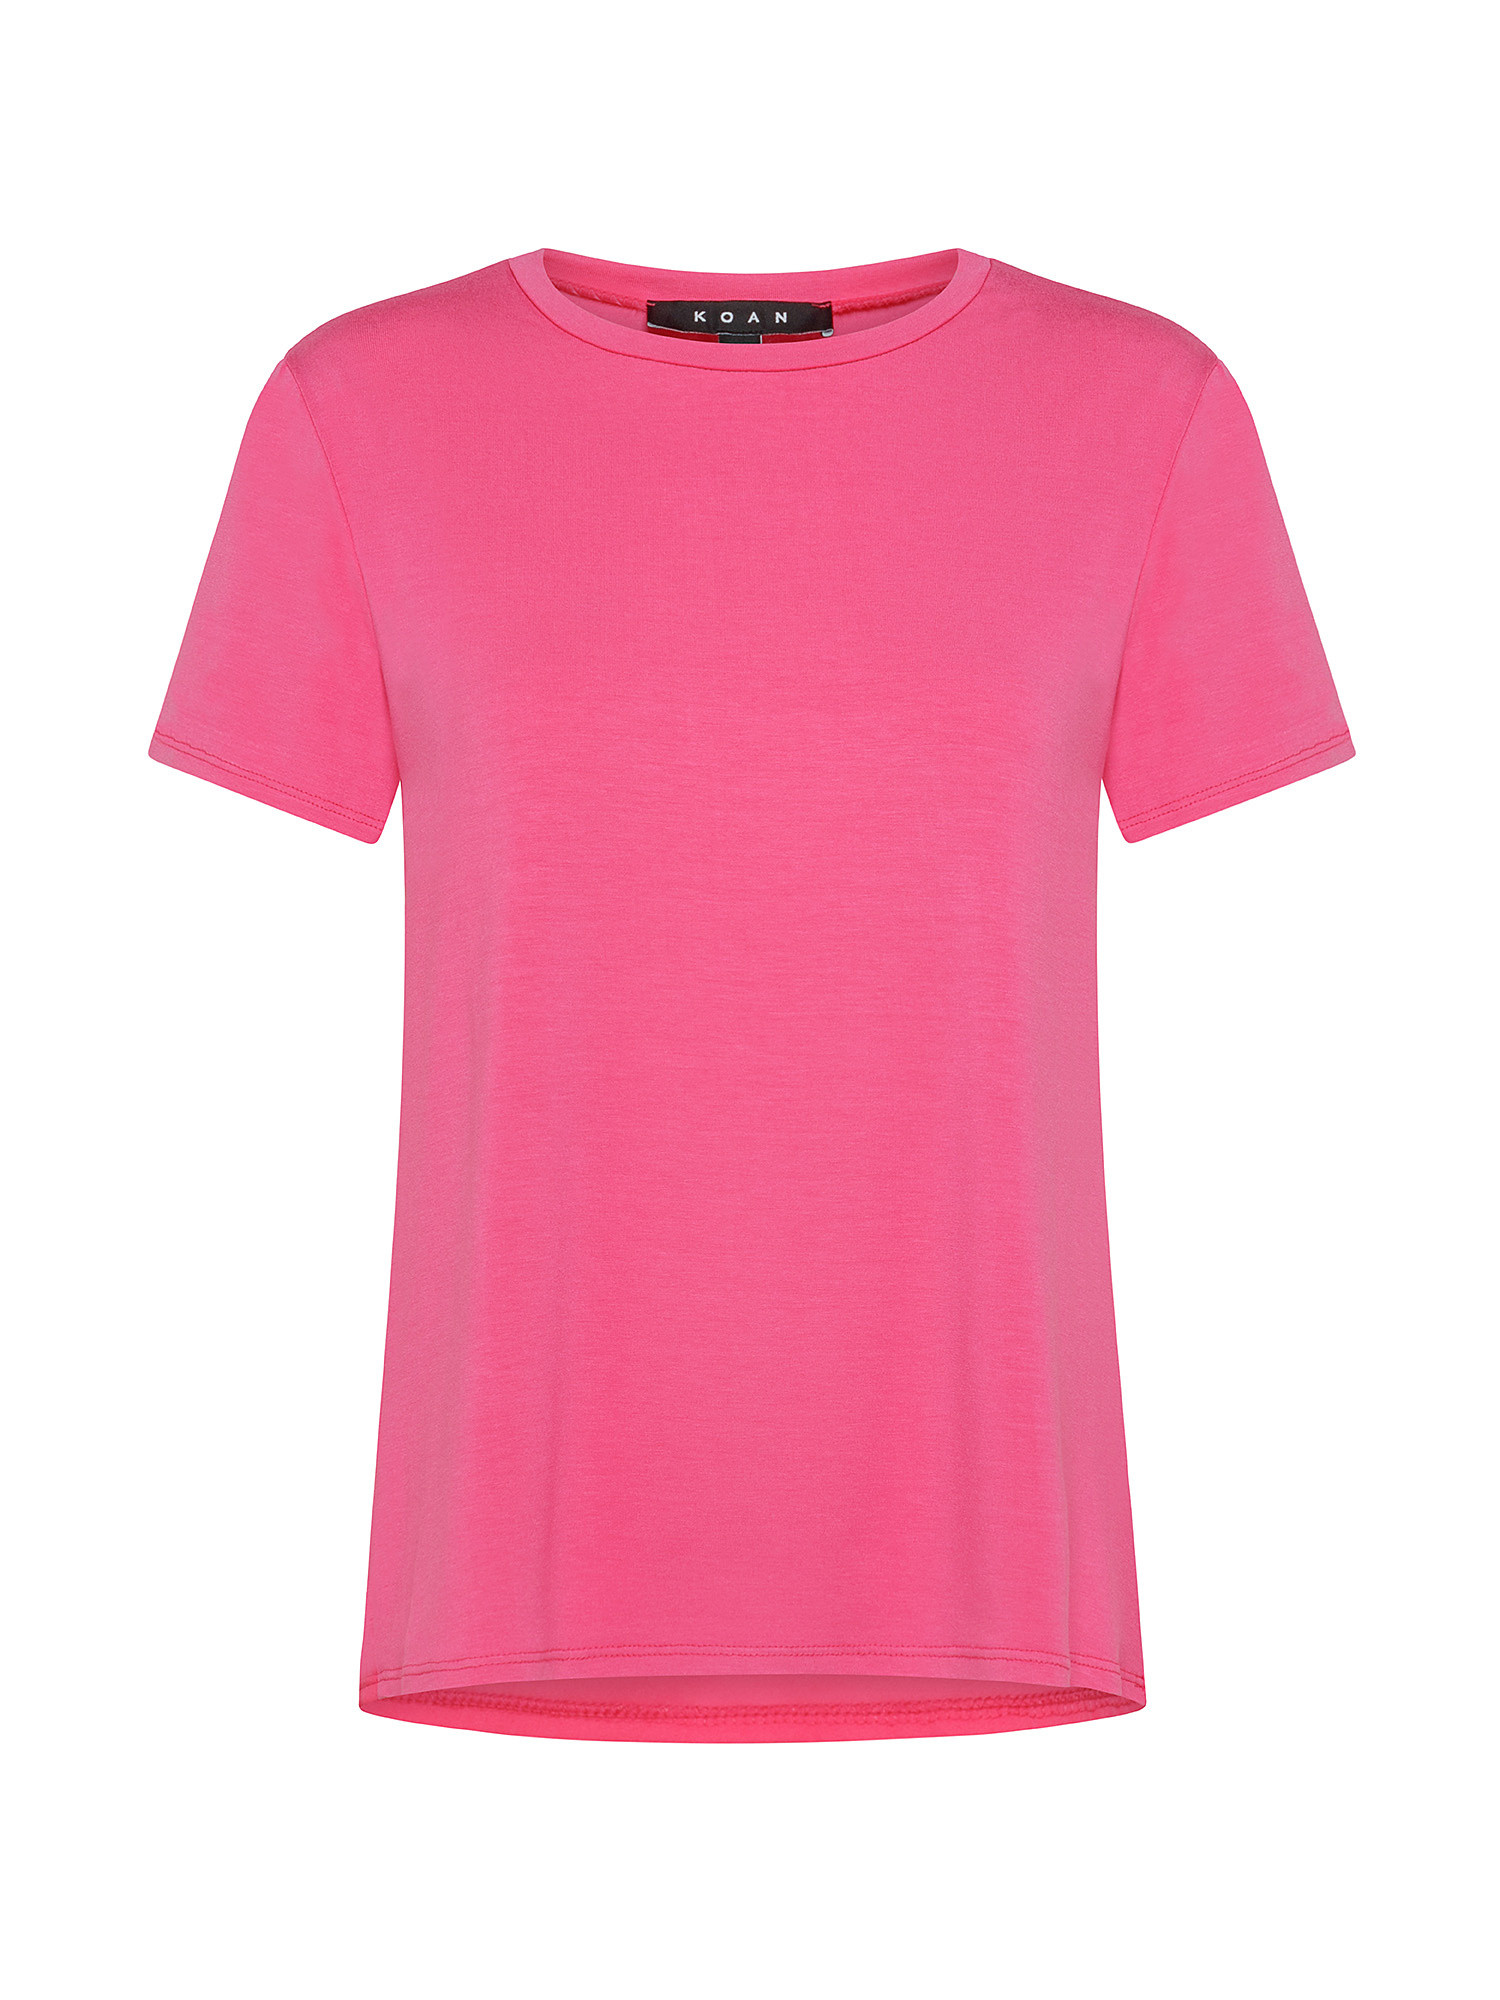 T-shirt con dorso in tessuto, Rosa fuxia, large image number 0